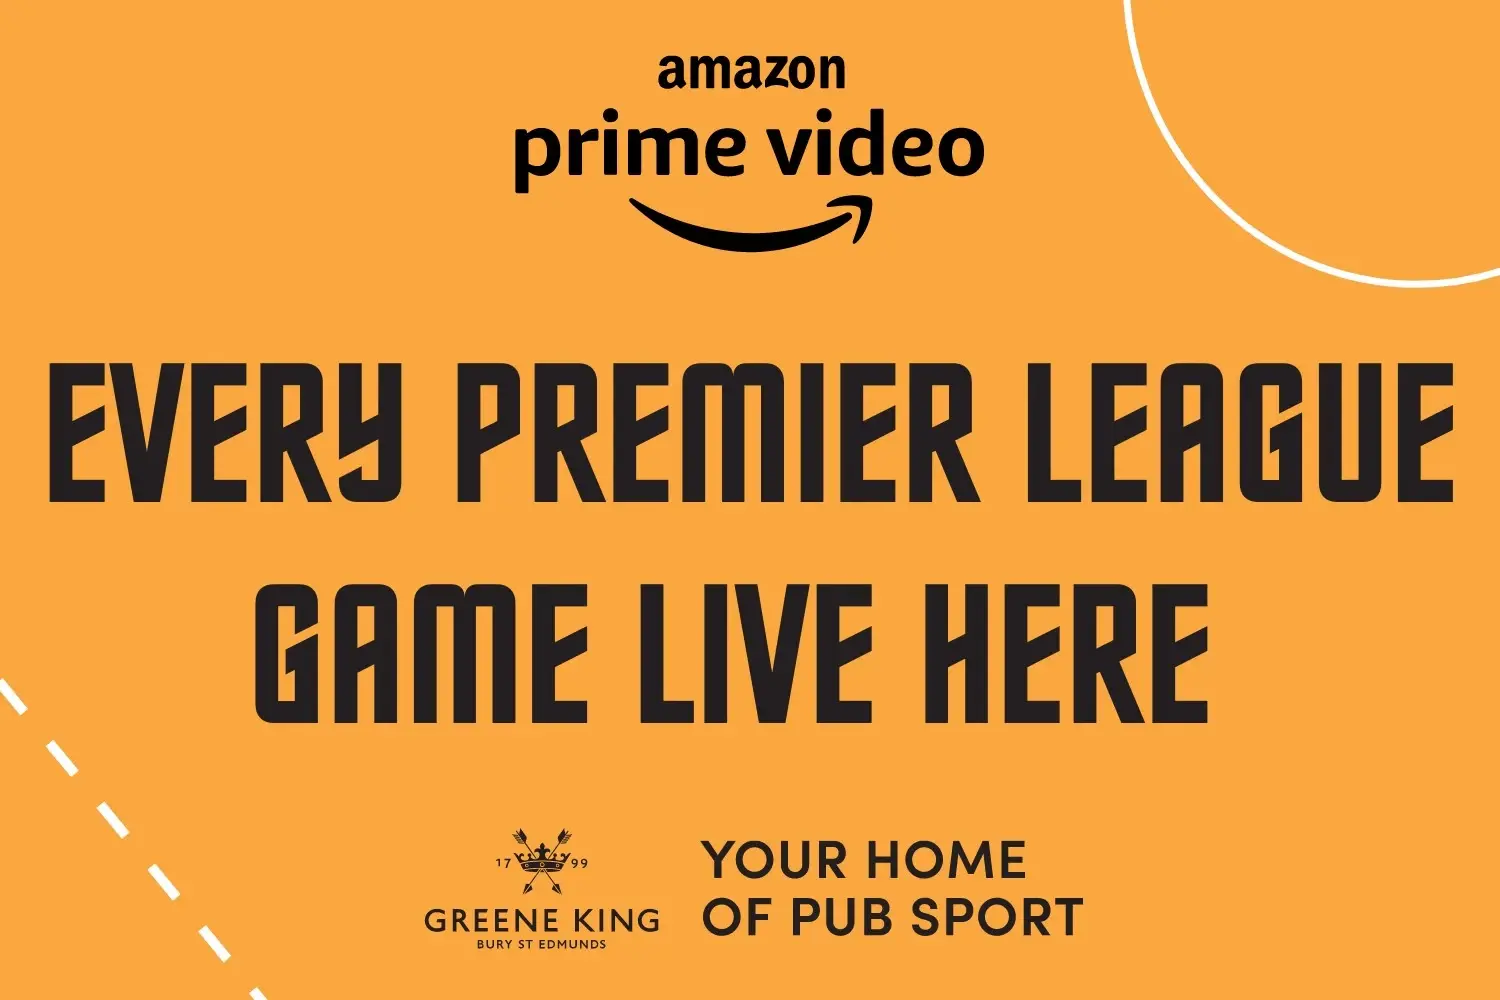 Local Pubs Showing Football On Amazon Prime in 2023